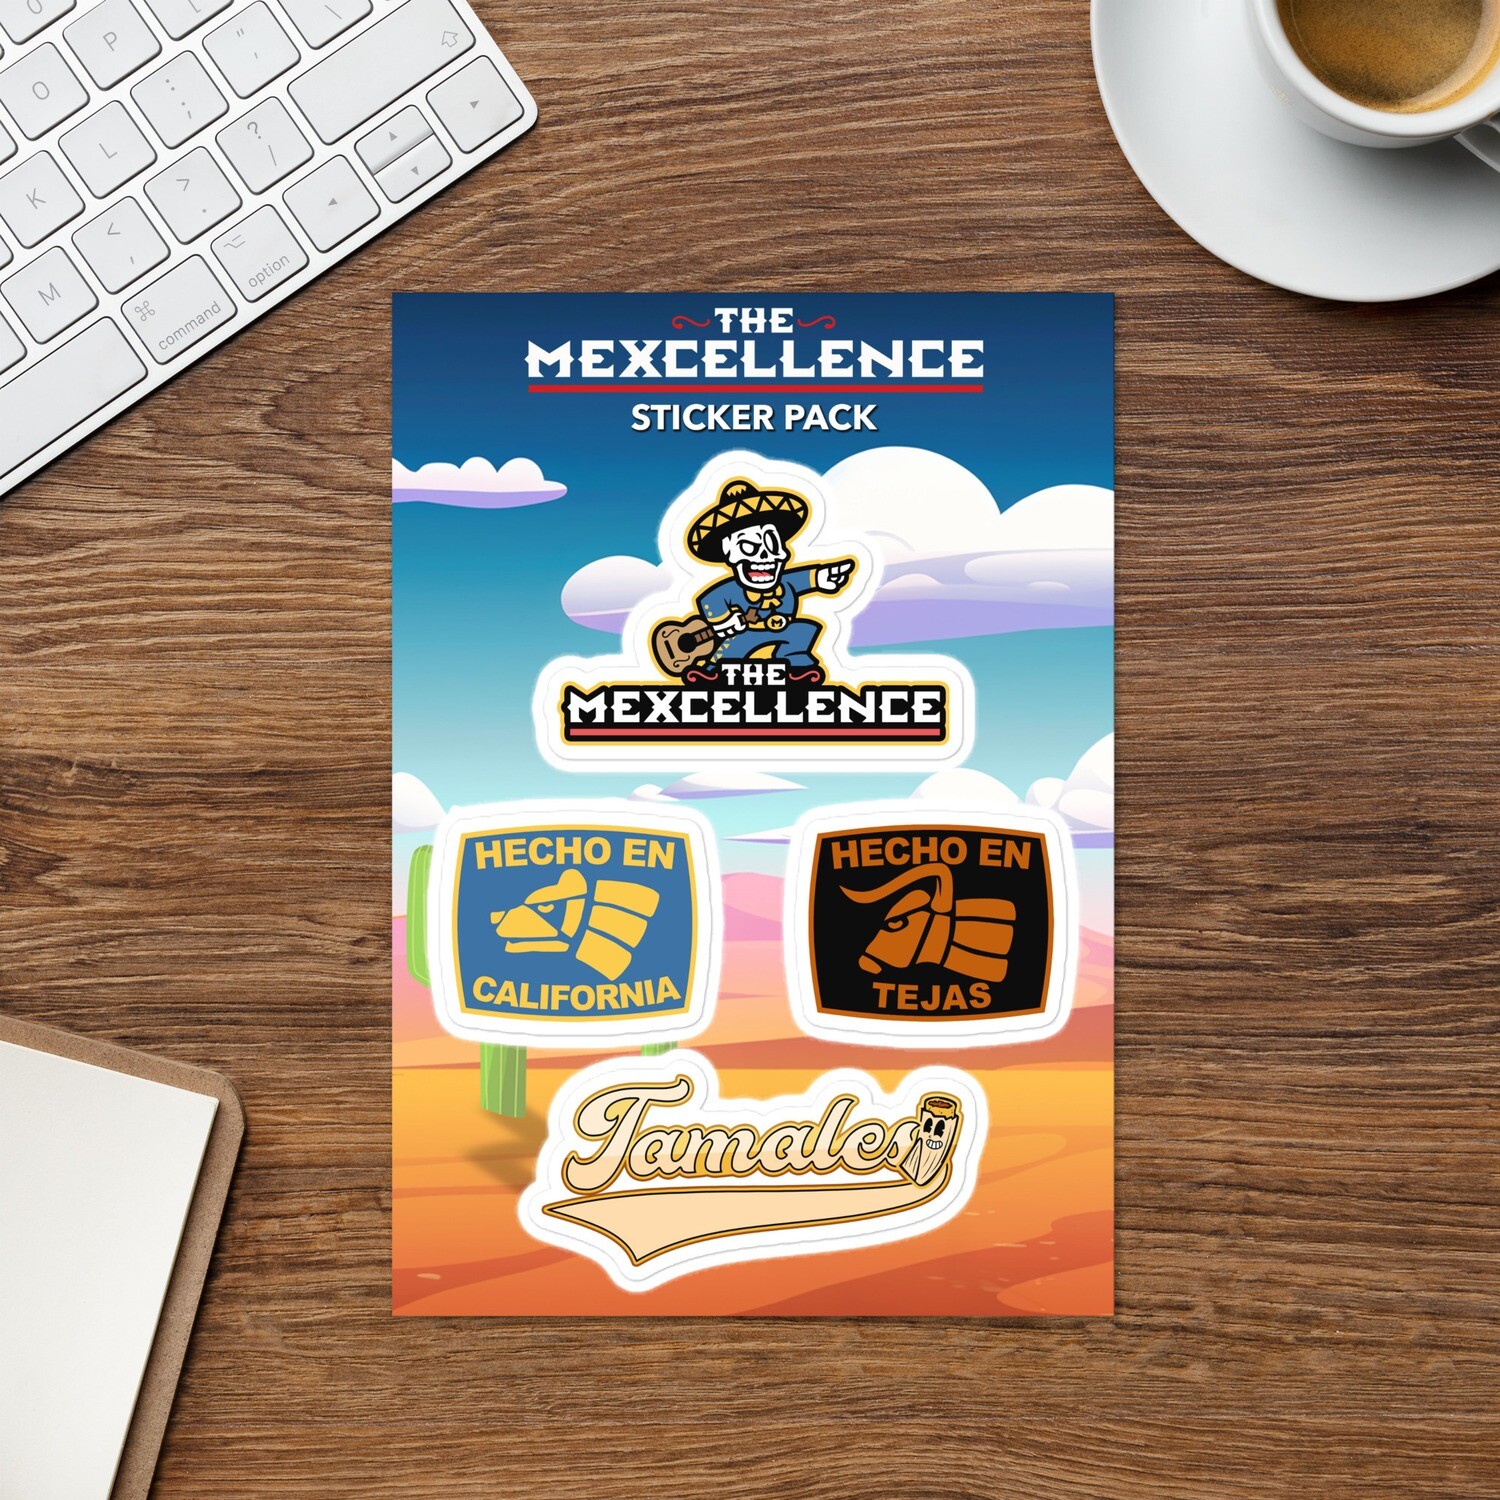 The Mexcellence Sticker Pack #1